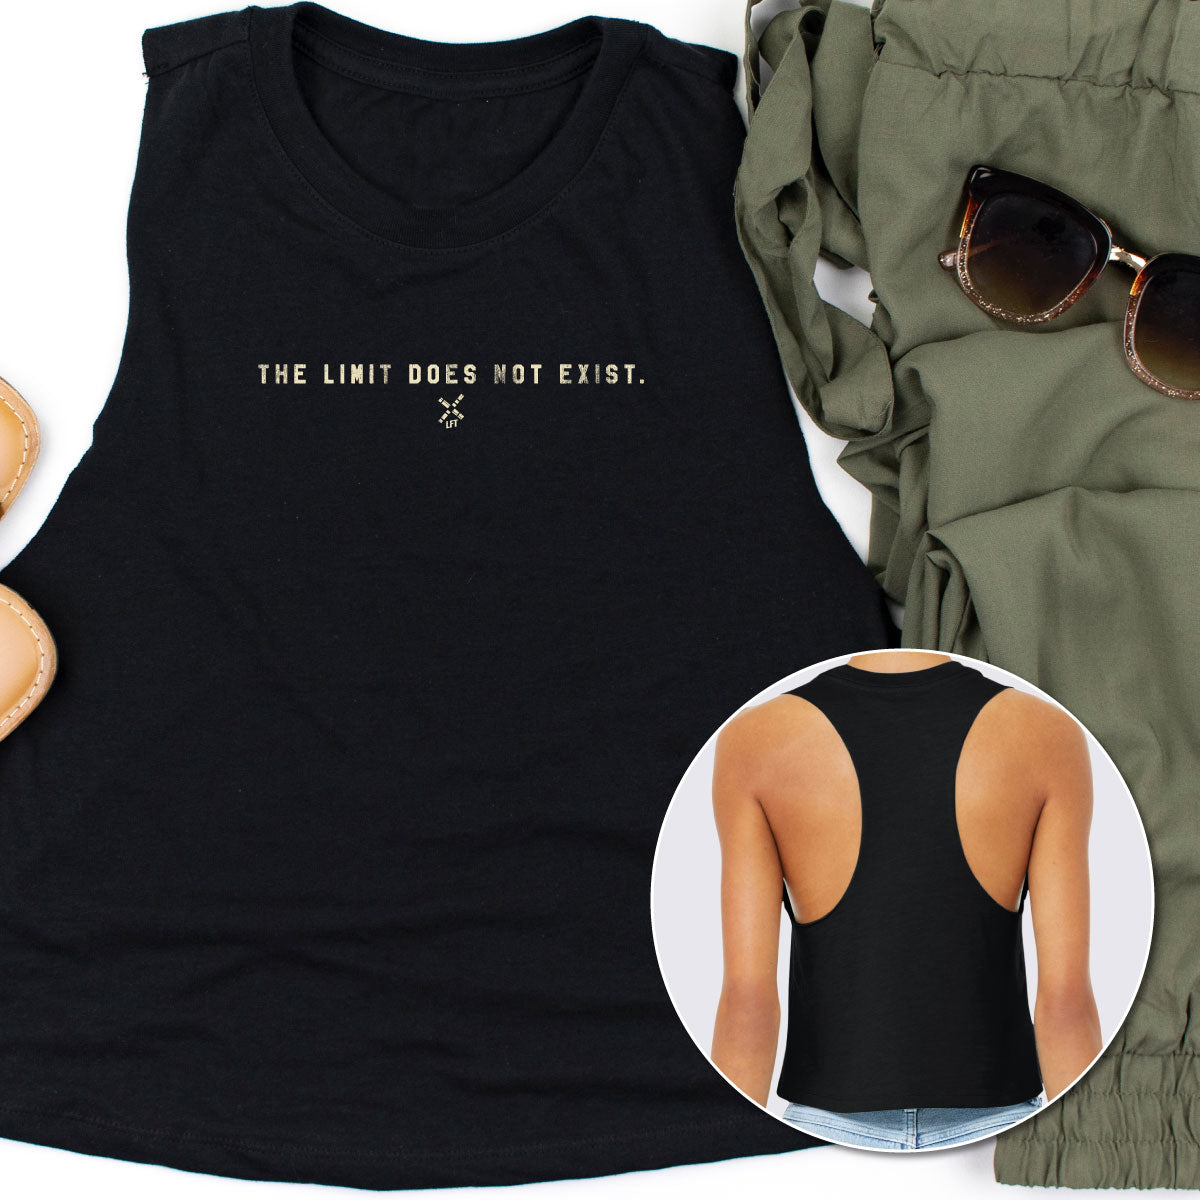 The Limit Does Not Exist Racerback Crop Tank - The LFT Clothing Company